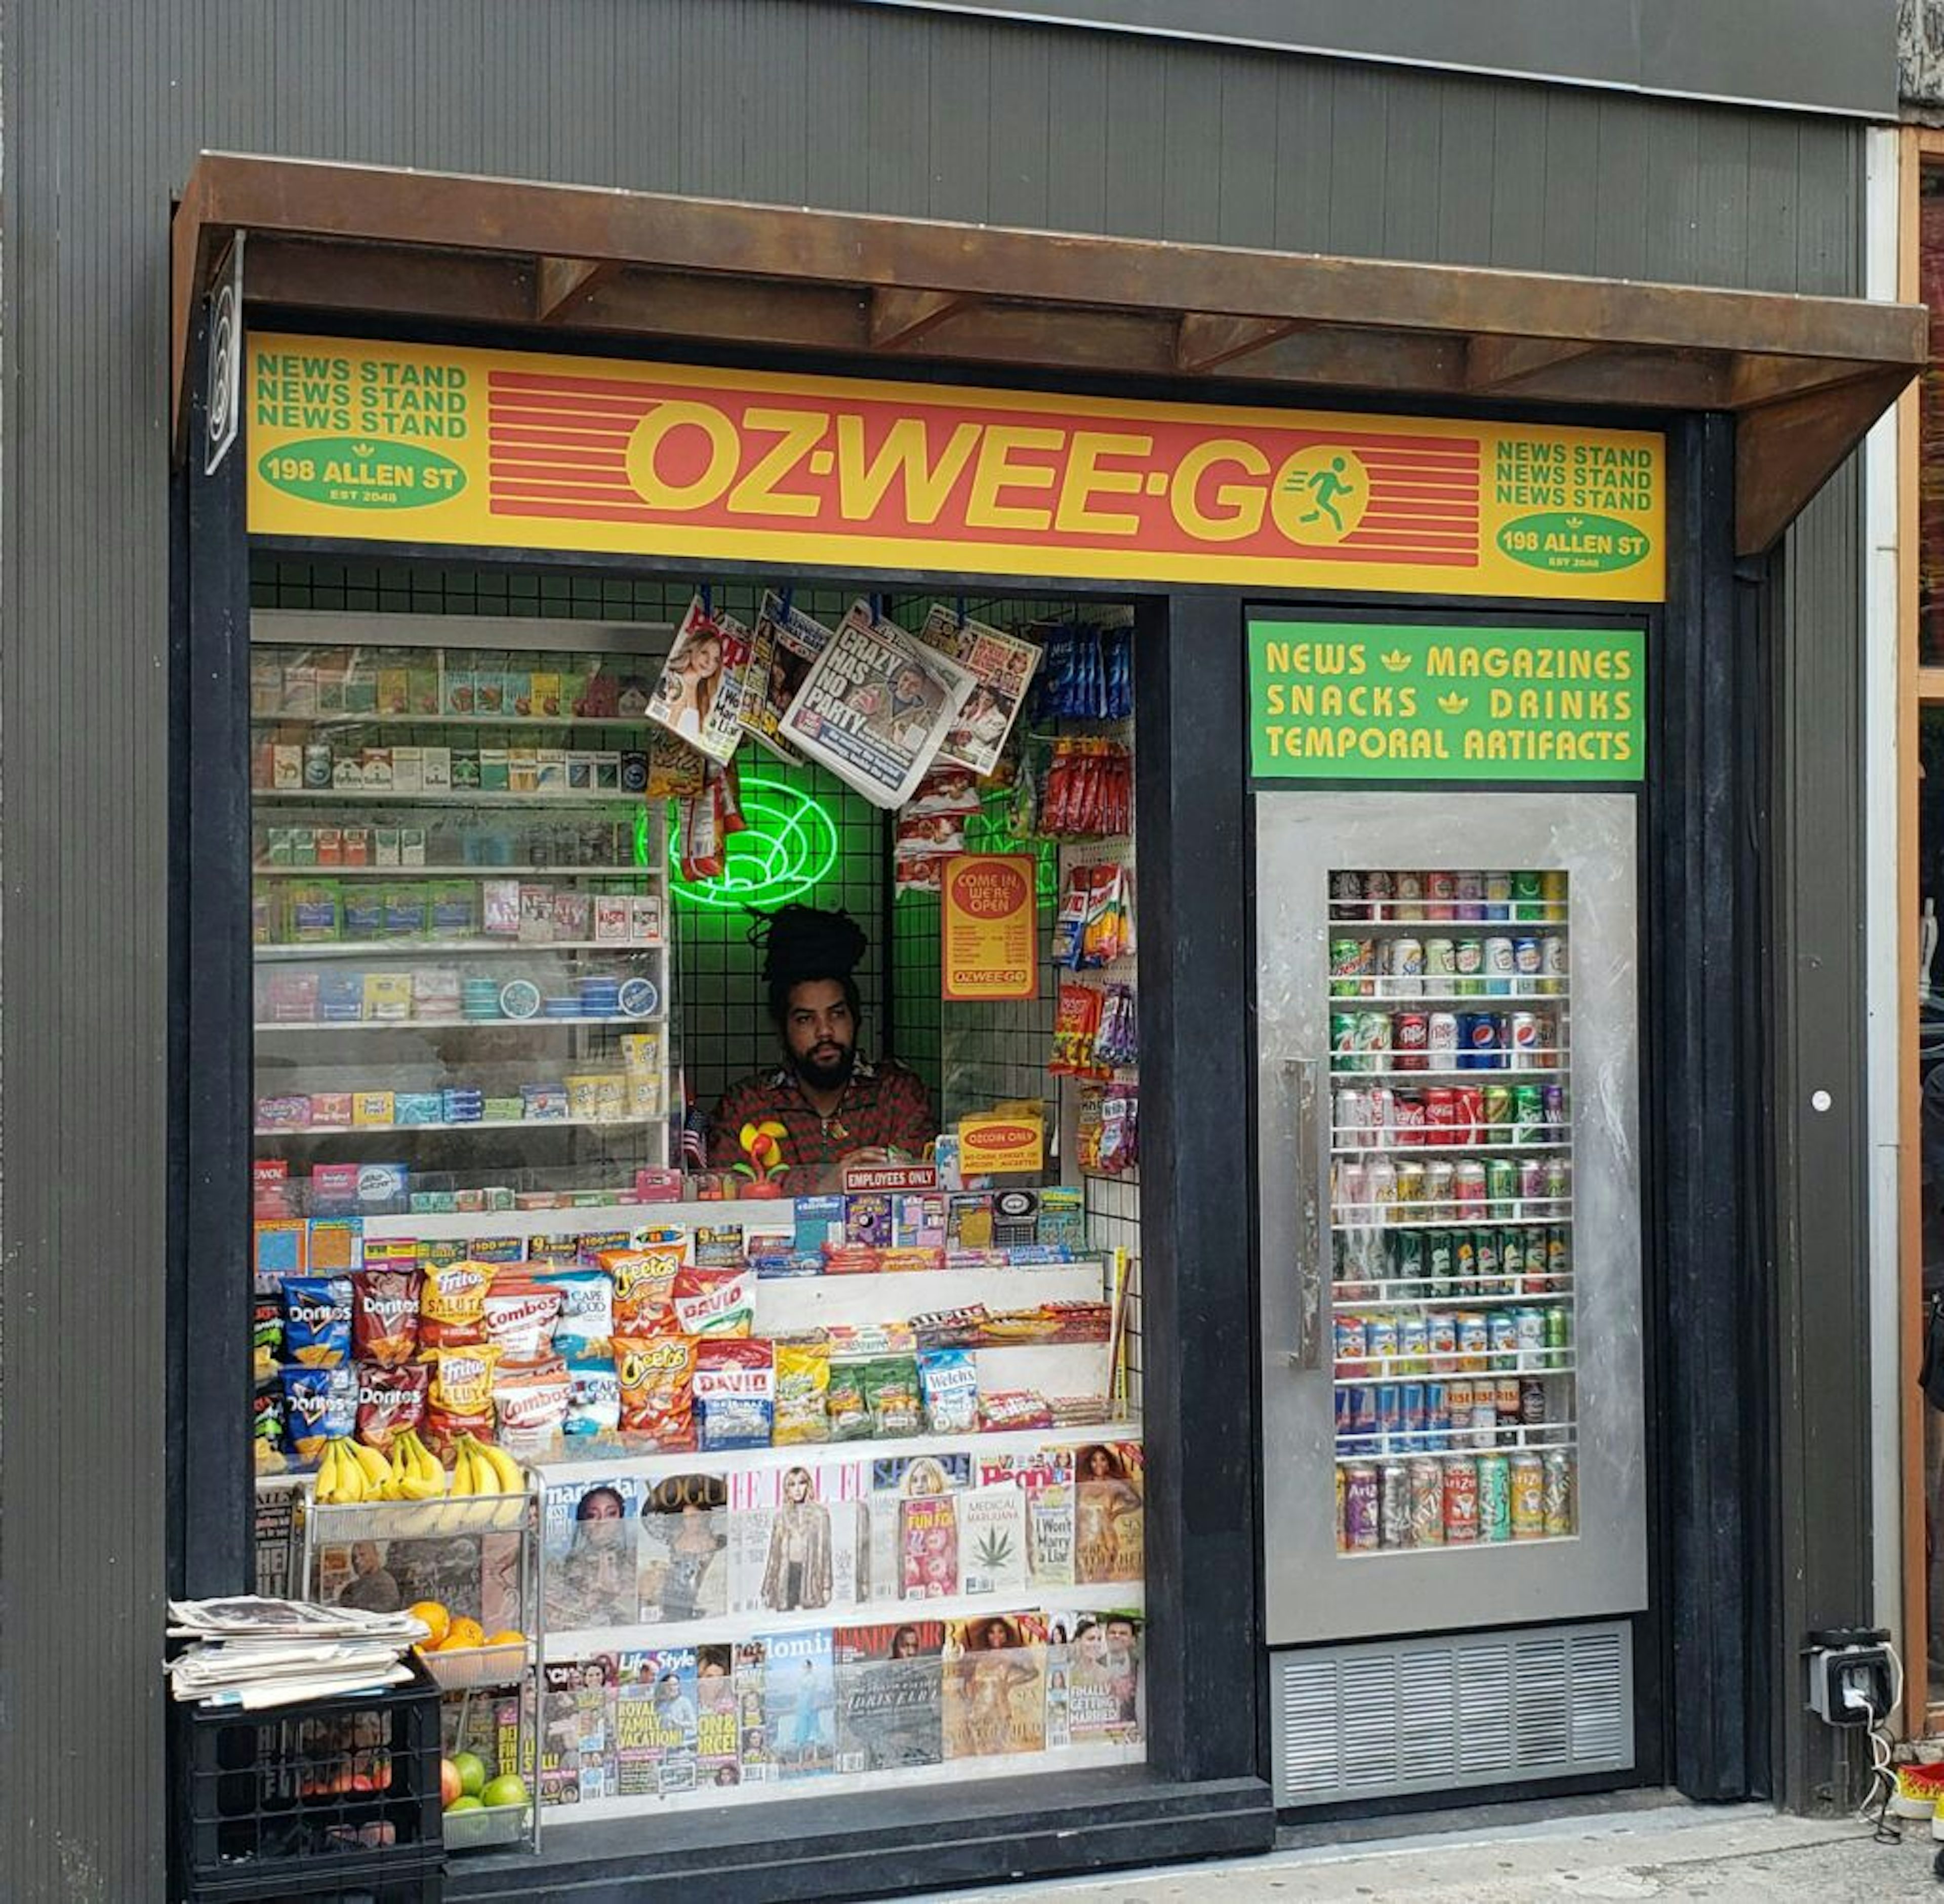 A cashier sits at the street-level Oz-wee-go bodega.